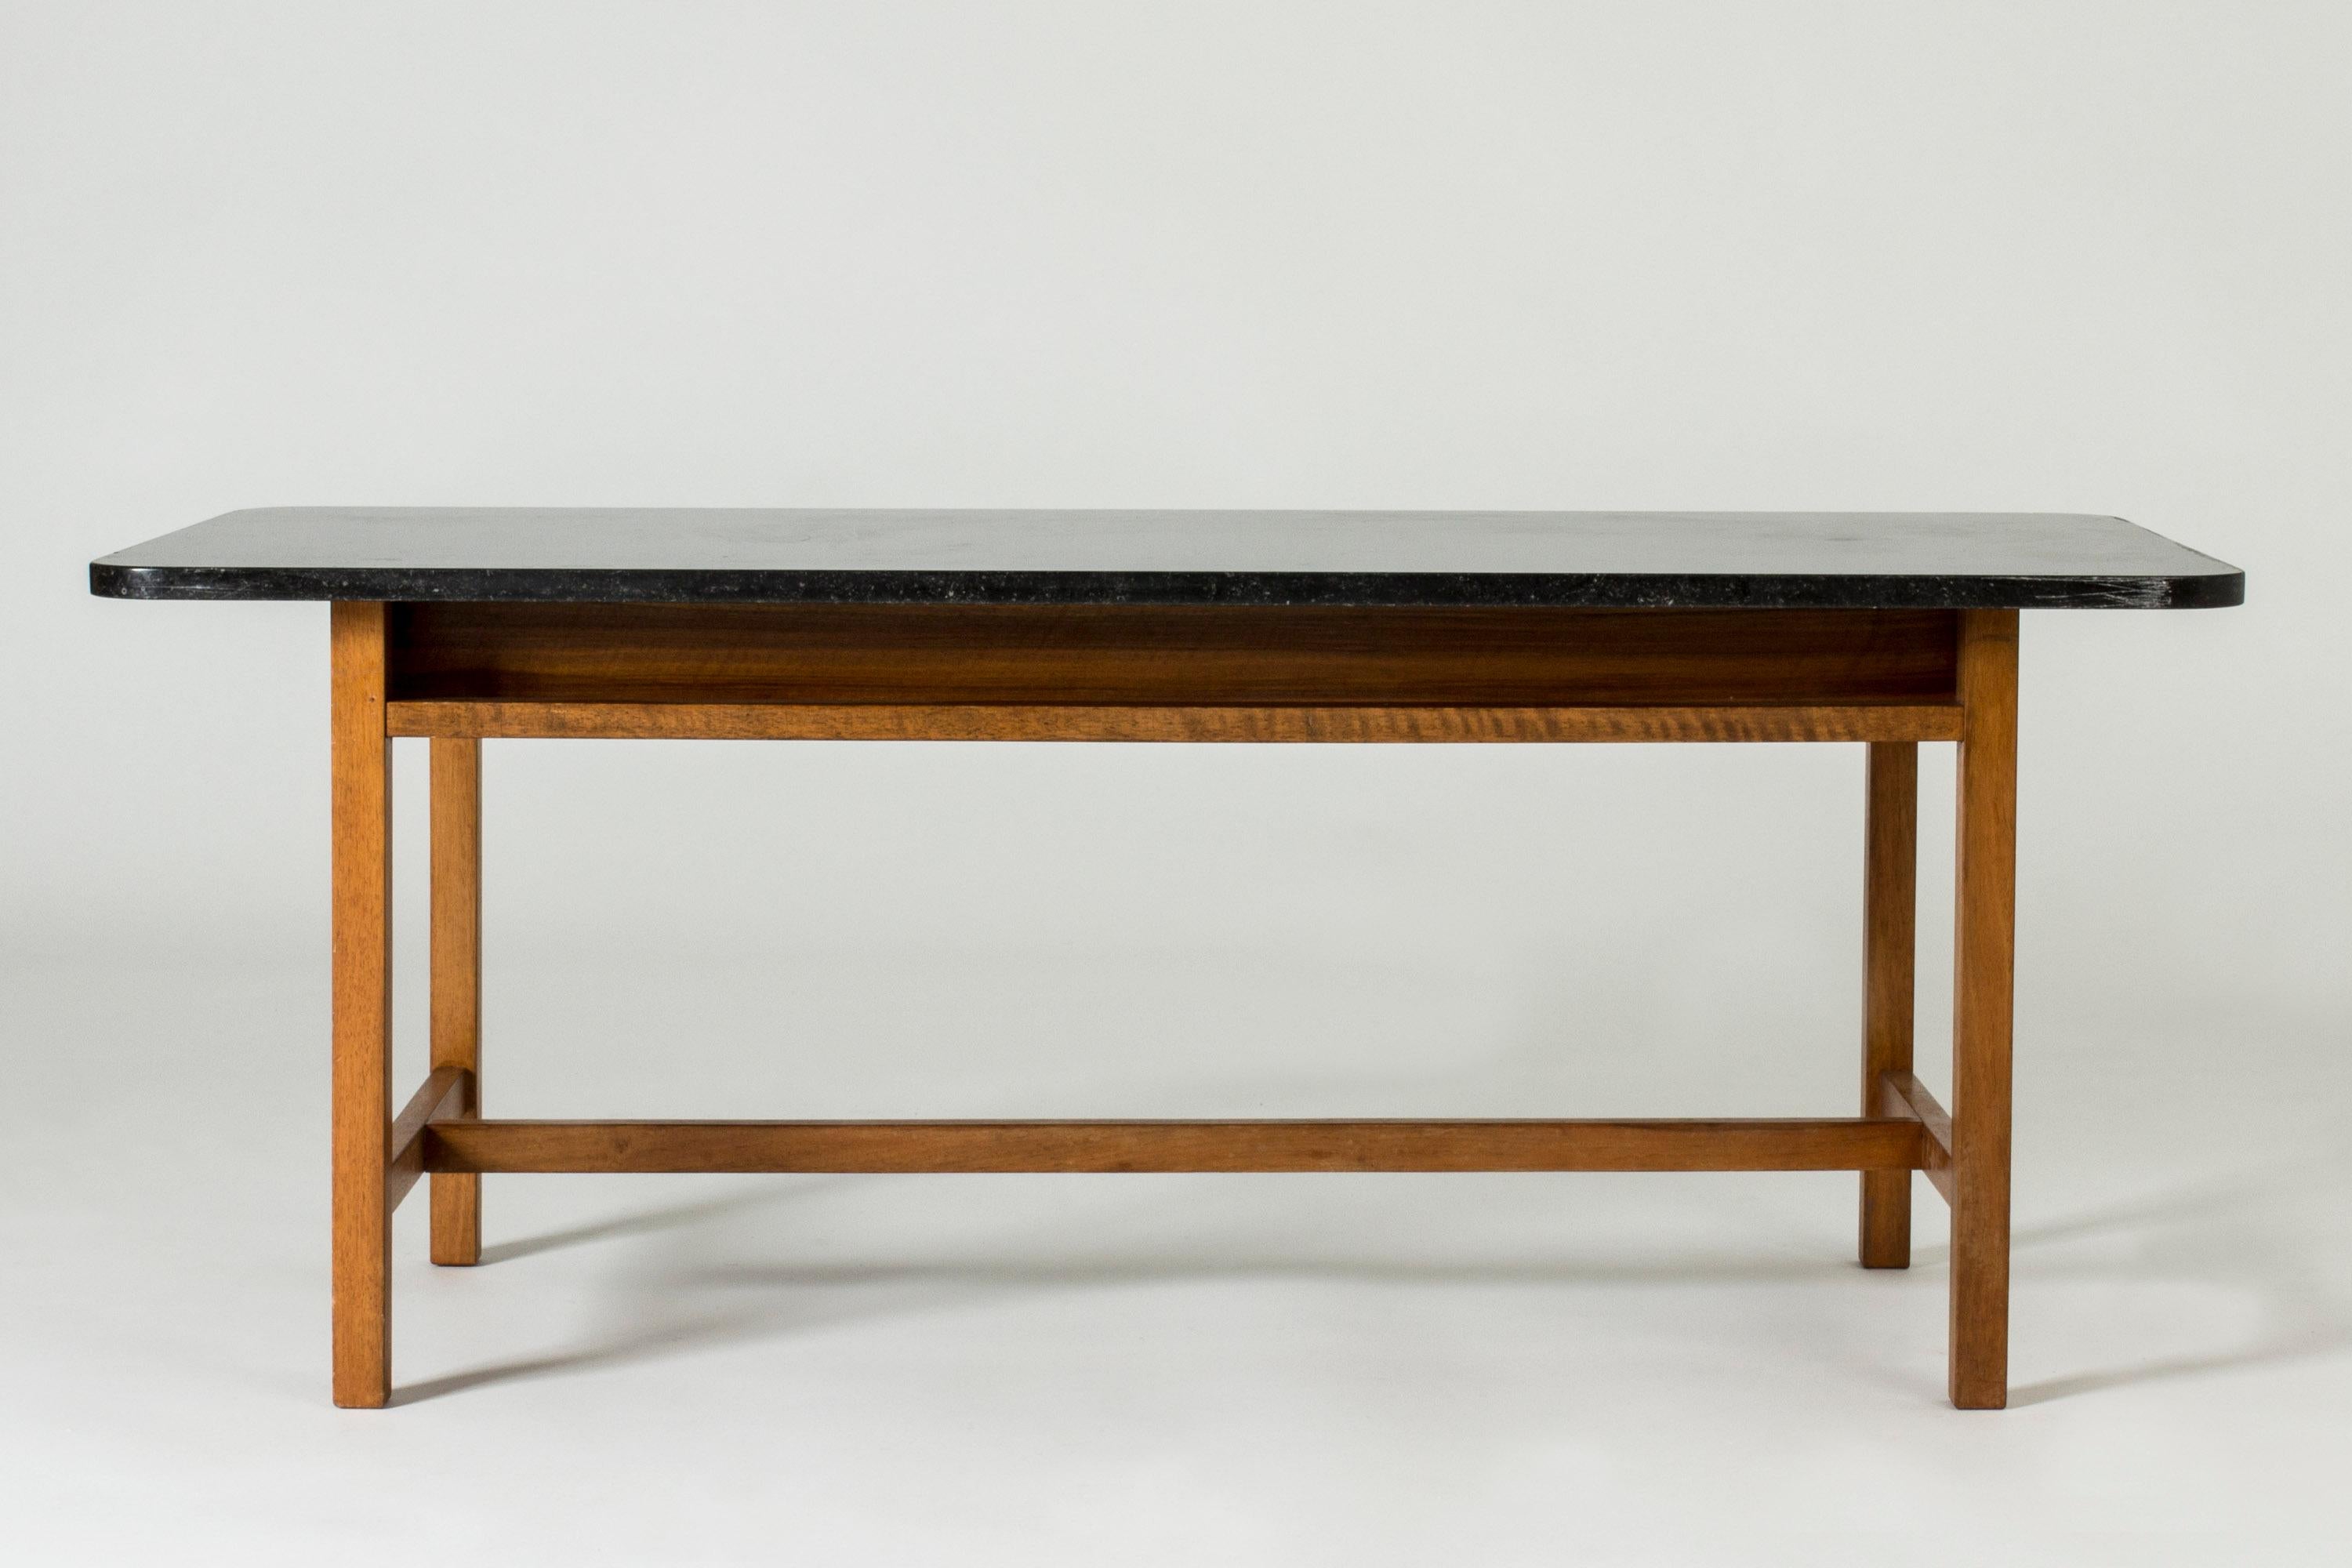 Elegant coffee table by Josef Frank, with a mahogany base and black marble coffee top. Elegant, light base contrasts with the heavy top. Rounded corners.